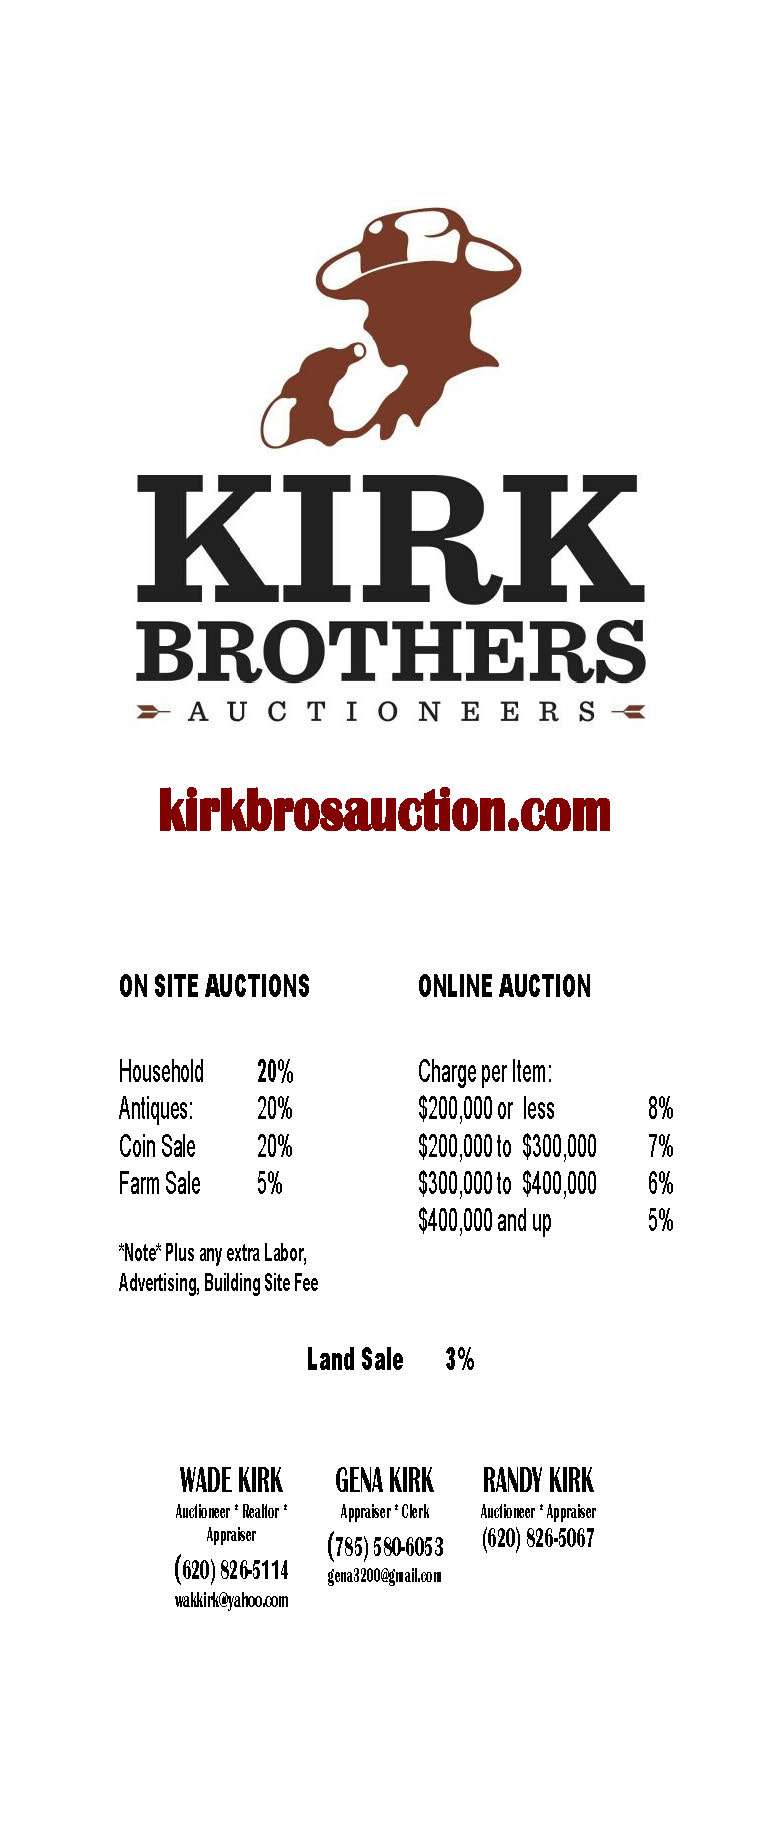 Kirk Brothers Auctioneers rates